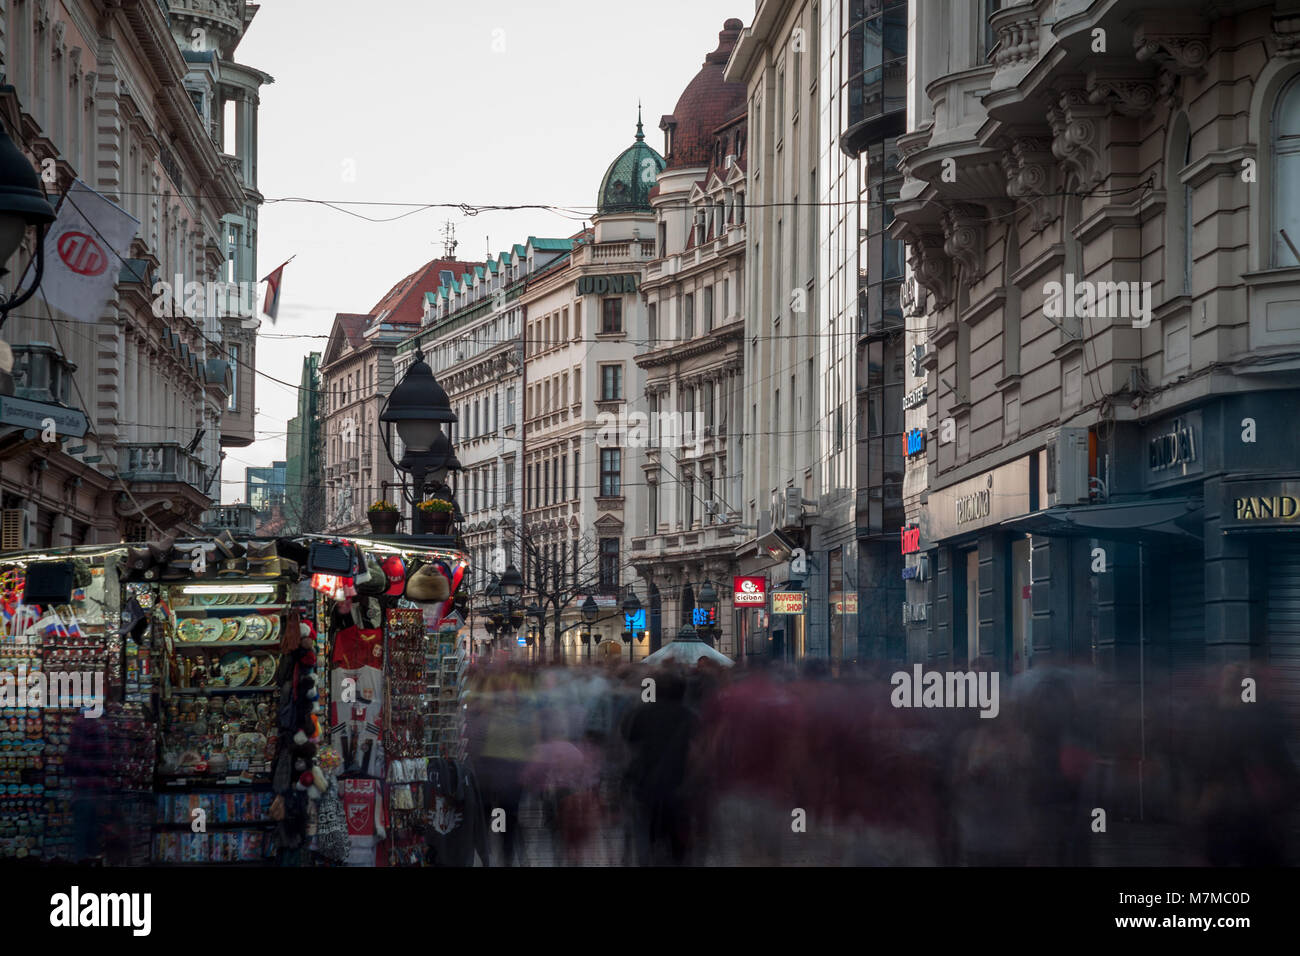 BELGRADE, SERBIA - MARCH 11, 2018: Kneza Mihailova street at dawn, crowded. Also known as Knez Mihaila, this is the main pedestrian street of the city Stock Photo